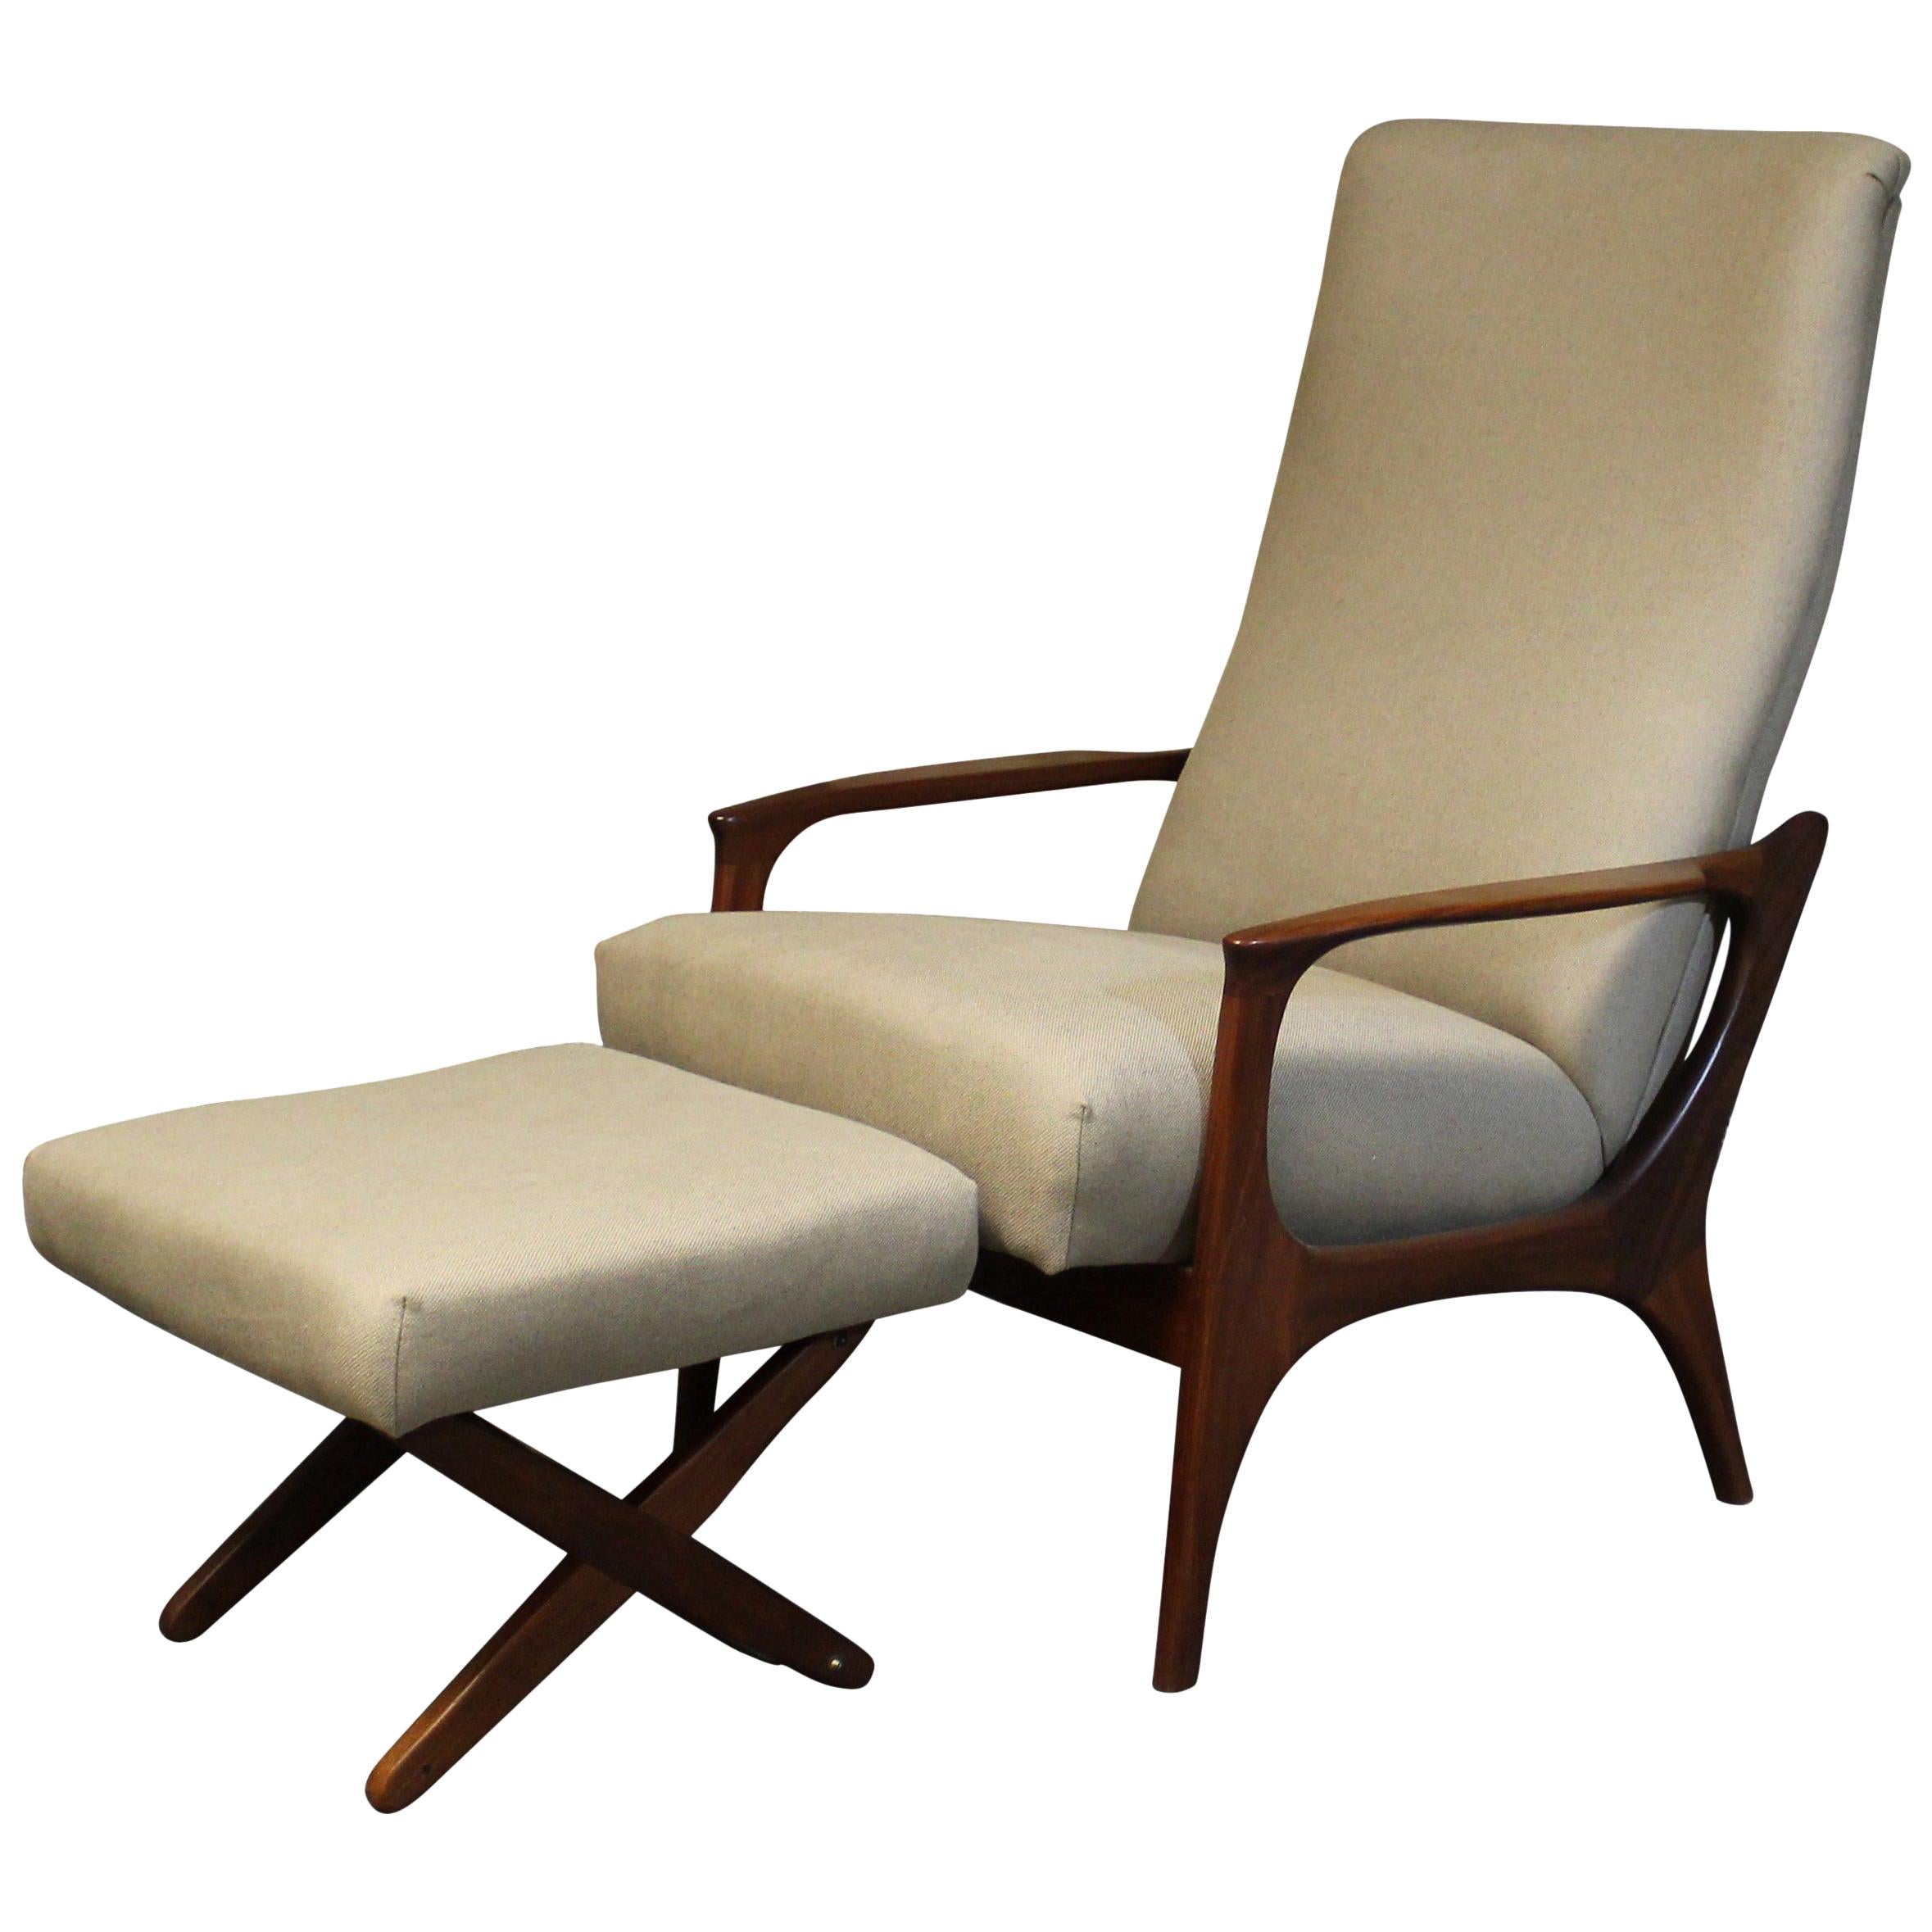 R. Huber Teak Reclining Lounge Chair with Ottoman